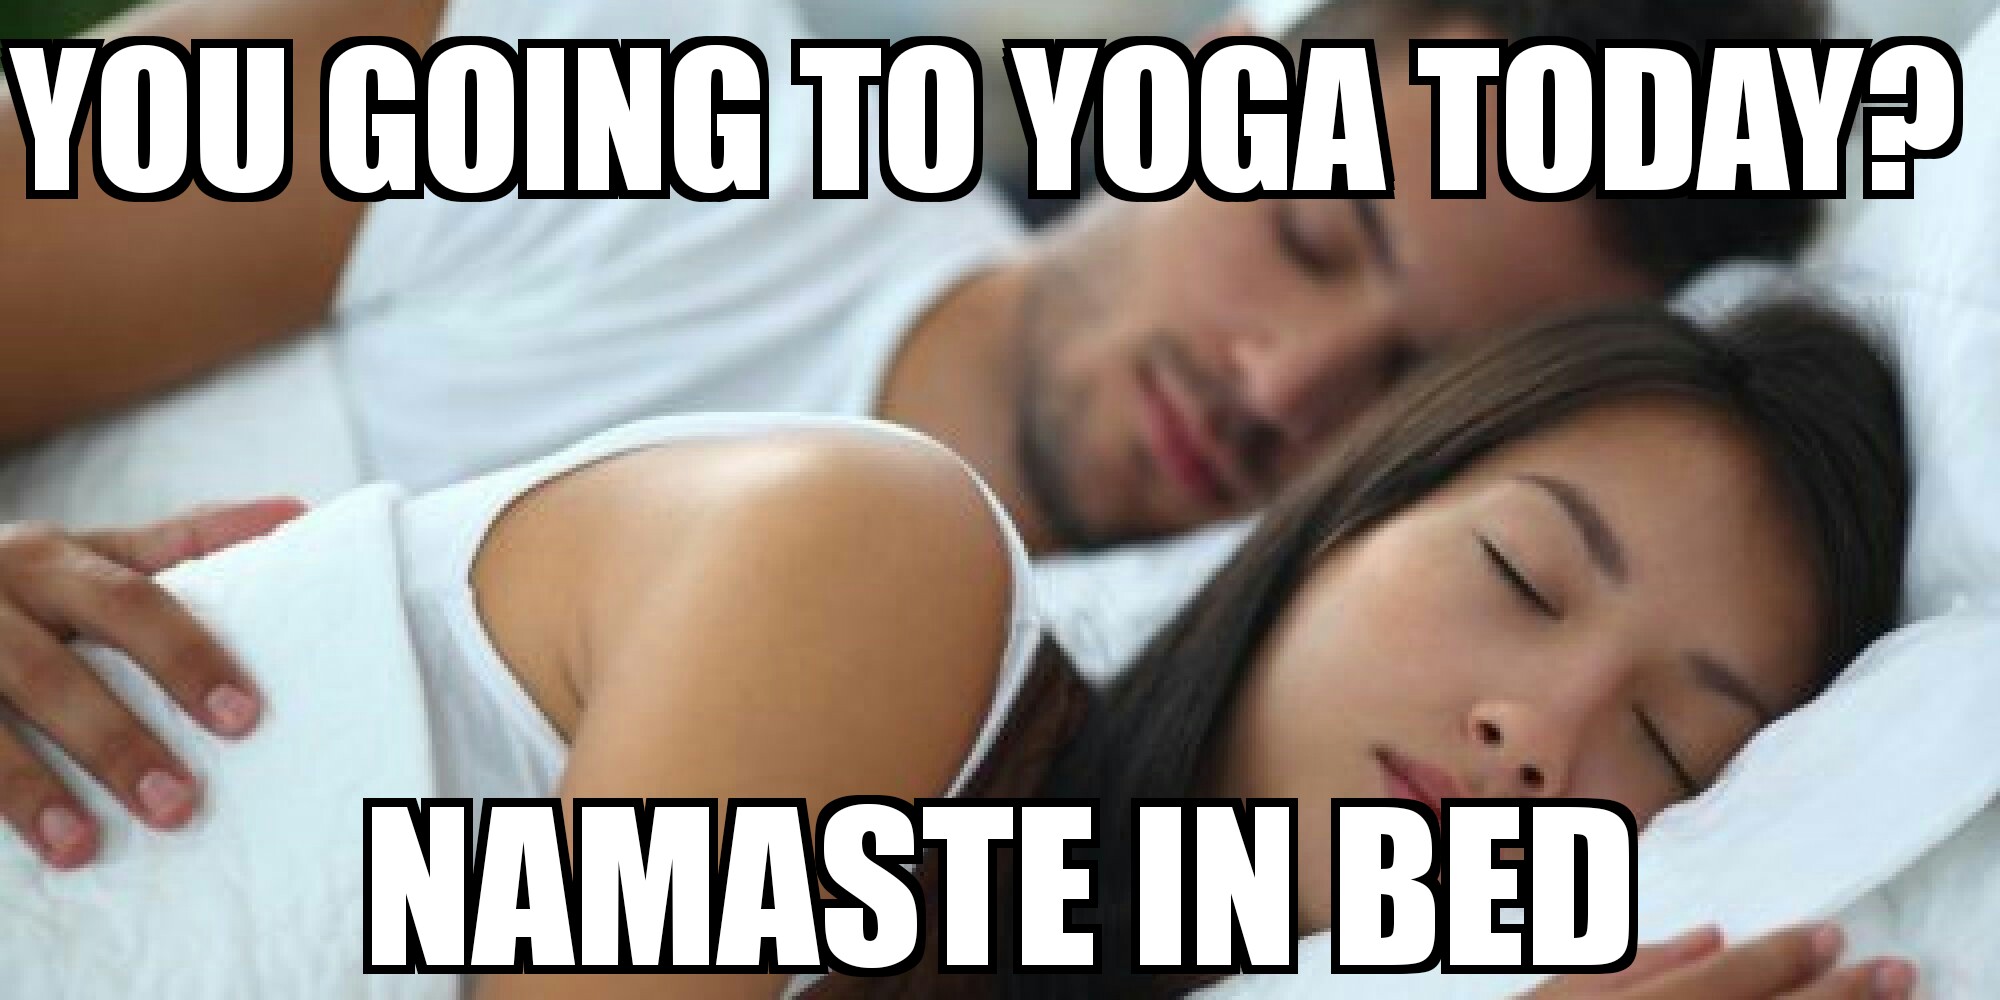 photo caption - You Going To Yoga Today? Namaste In Bed